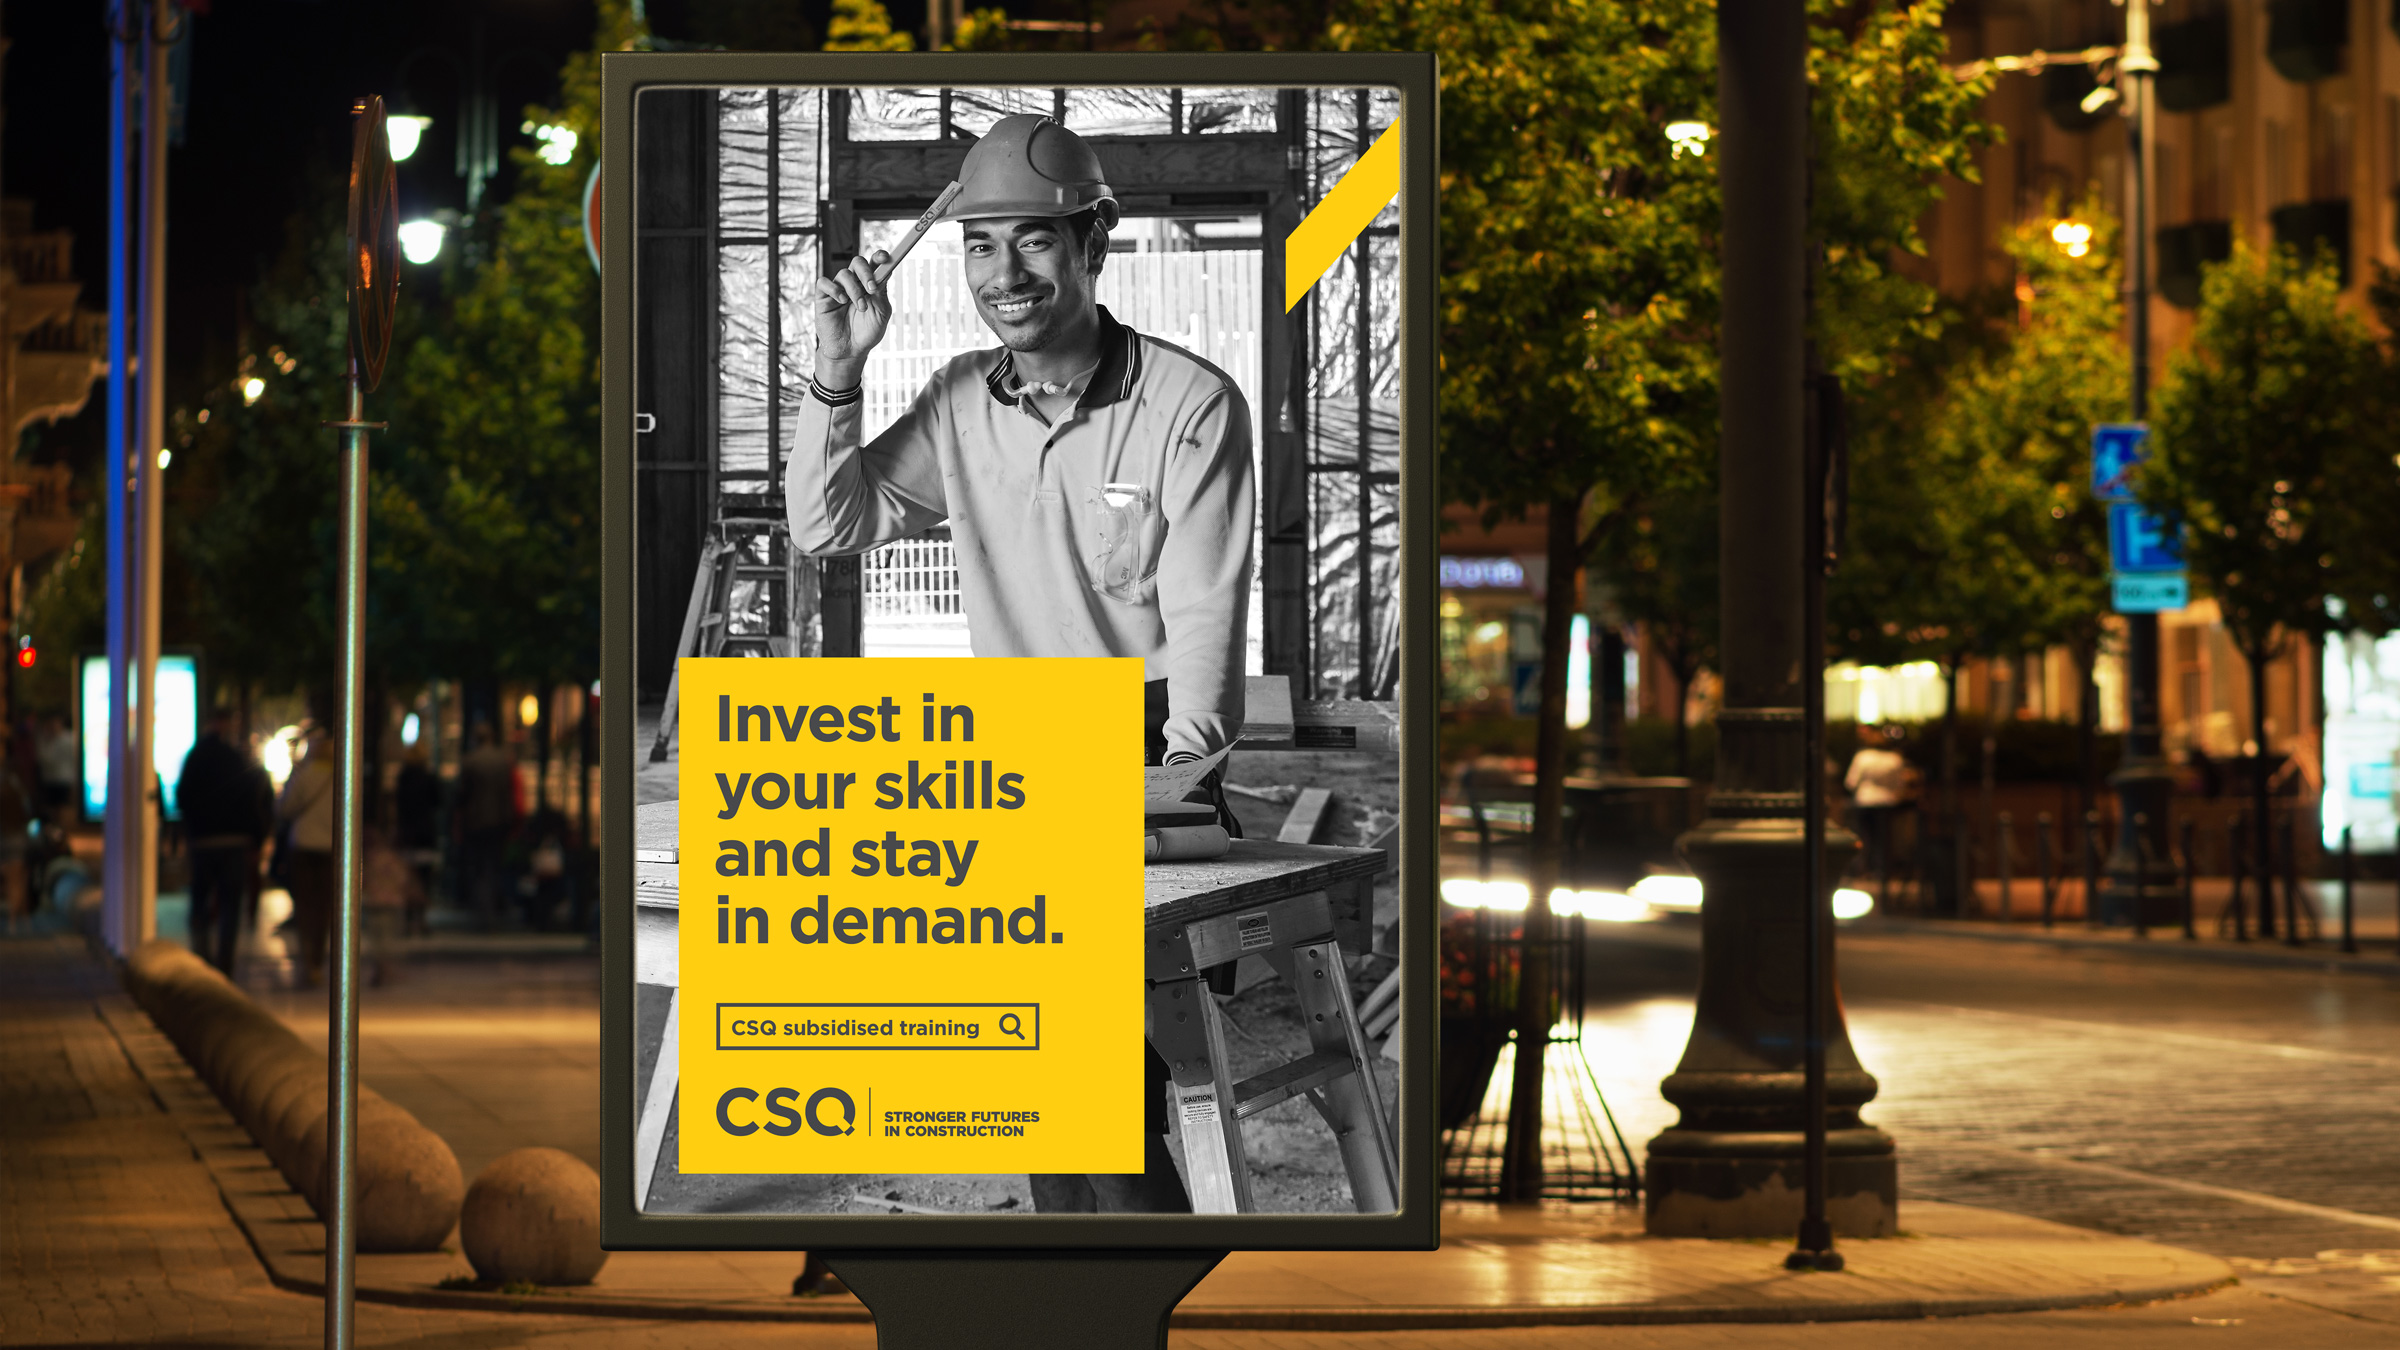 An out of home bus stop ad part of the CSQ advertising campaign. It features a tradie tapping his hard hat with a pencil. The copy reads "Invest in your skills and stay in demand